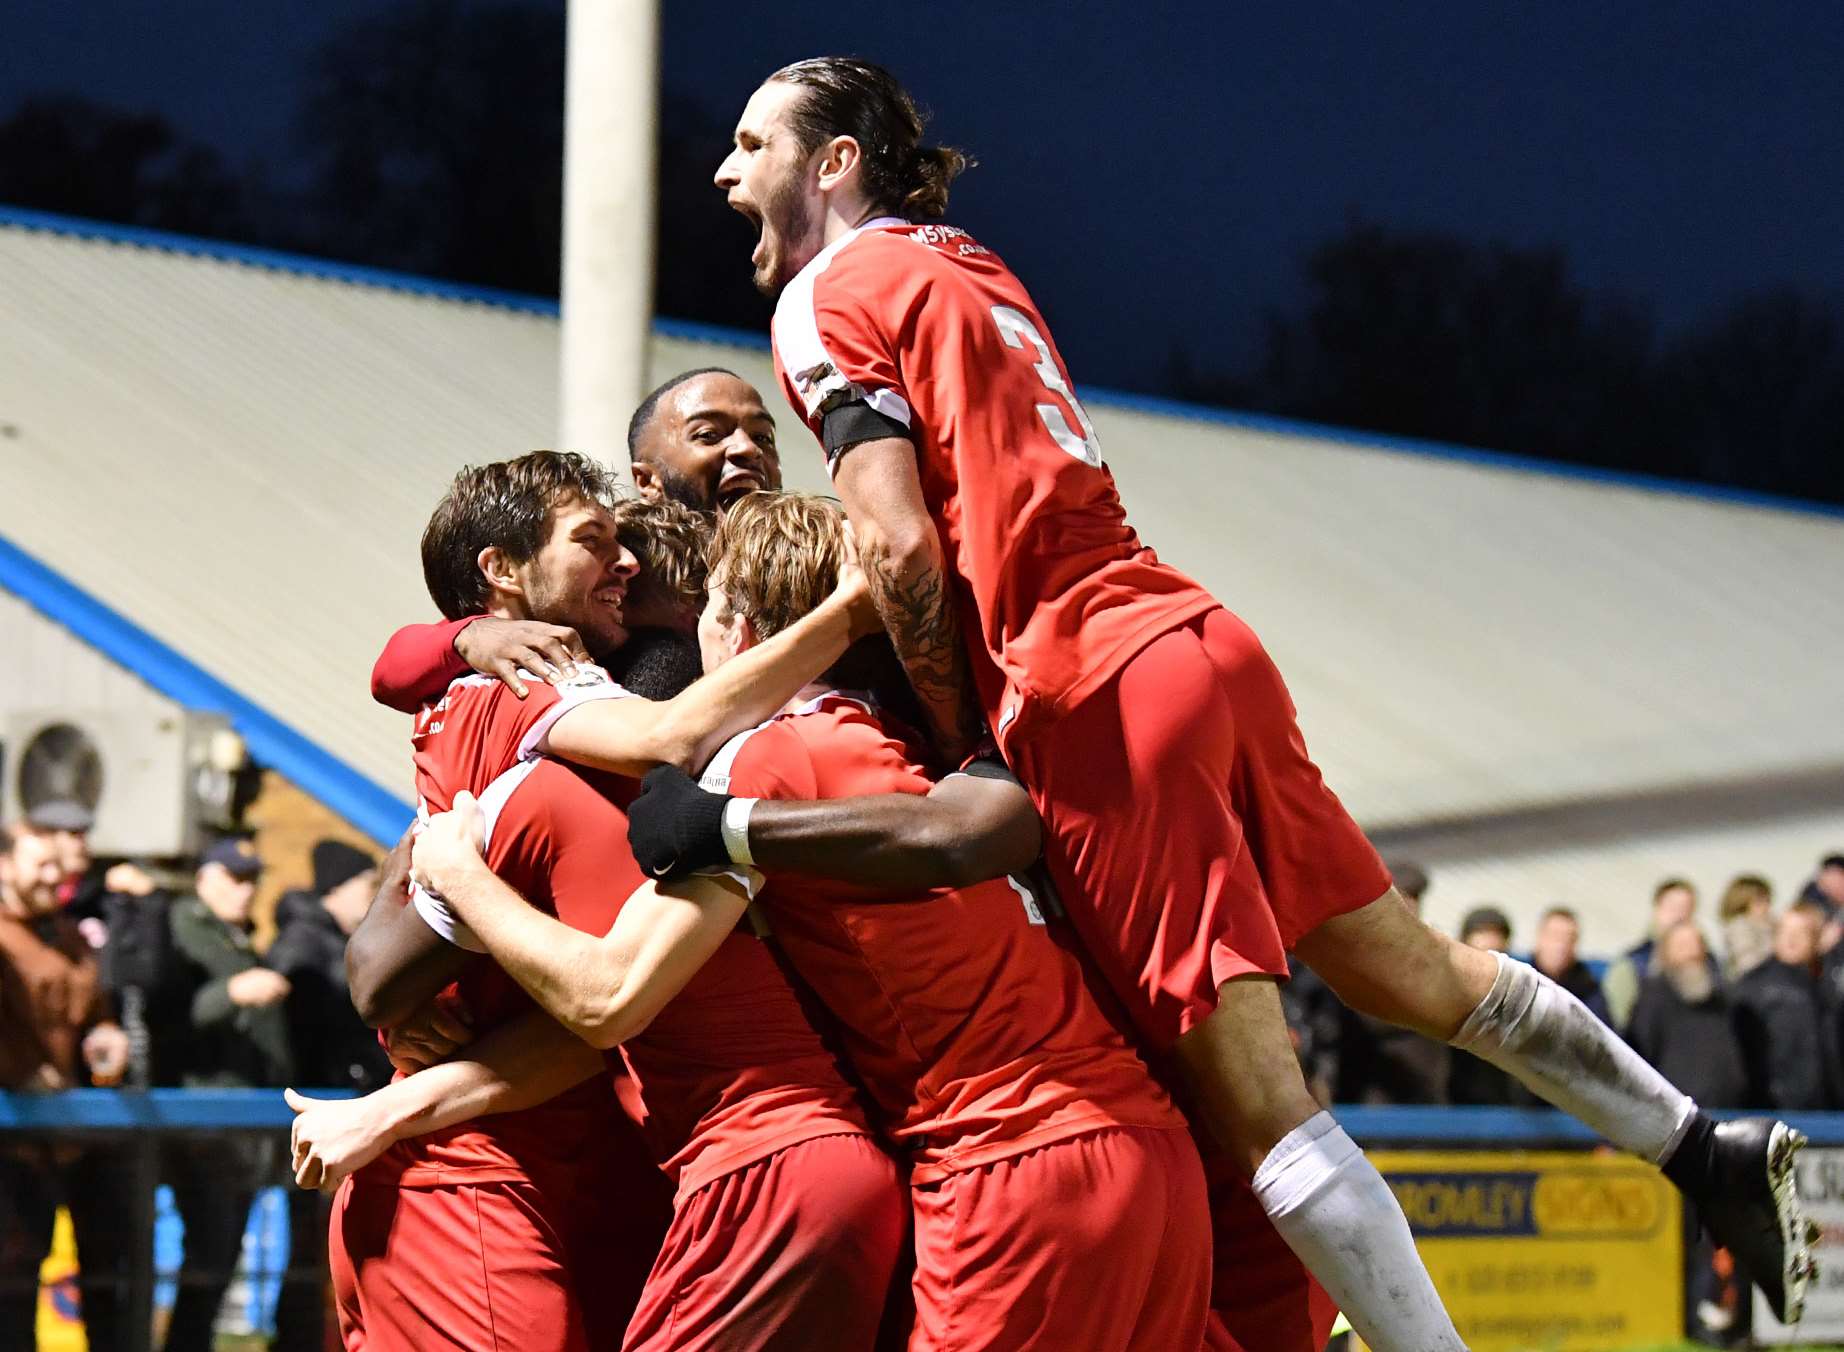 Welling celebrate going 3-2 ahead late on. Picture: Keith Gillard